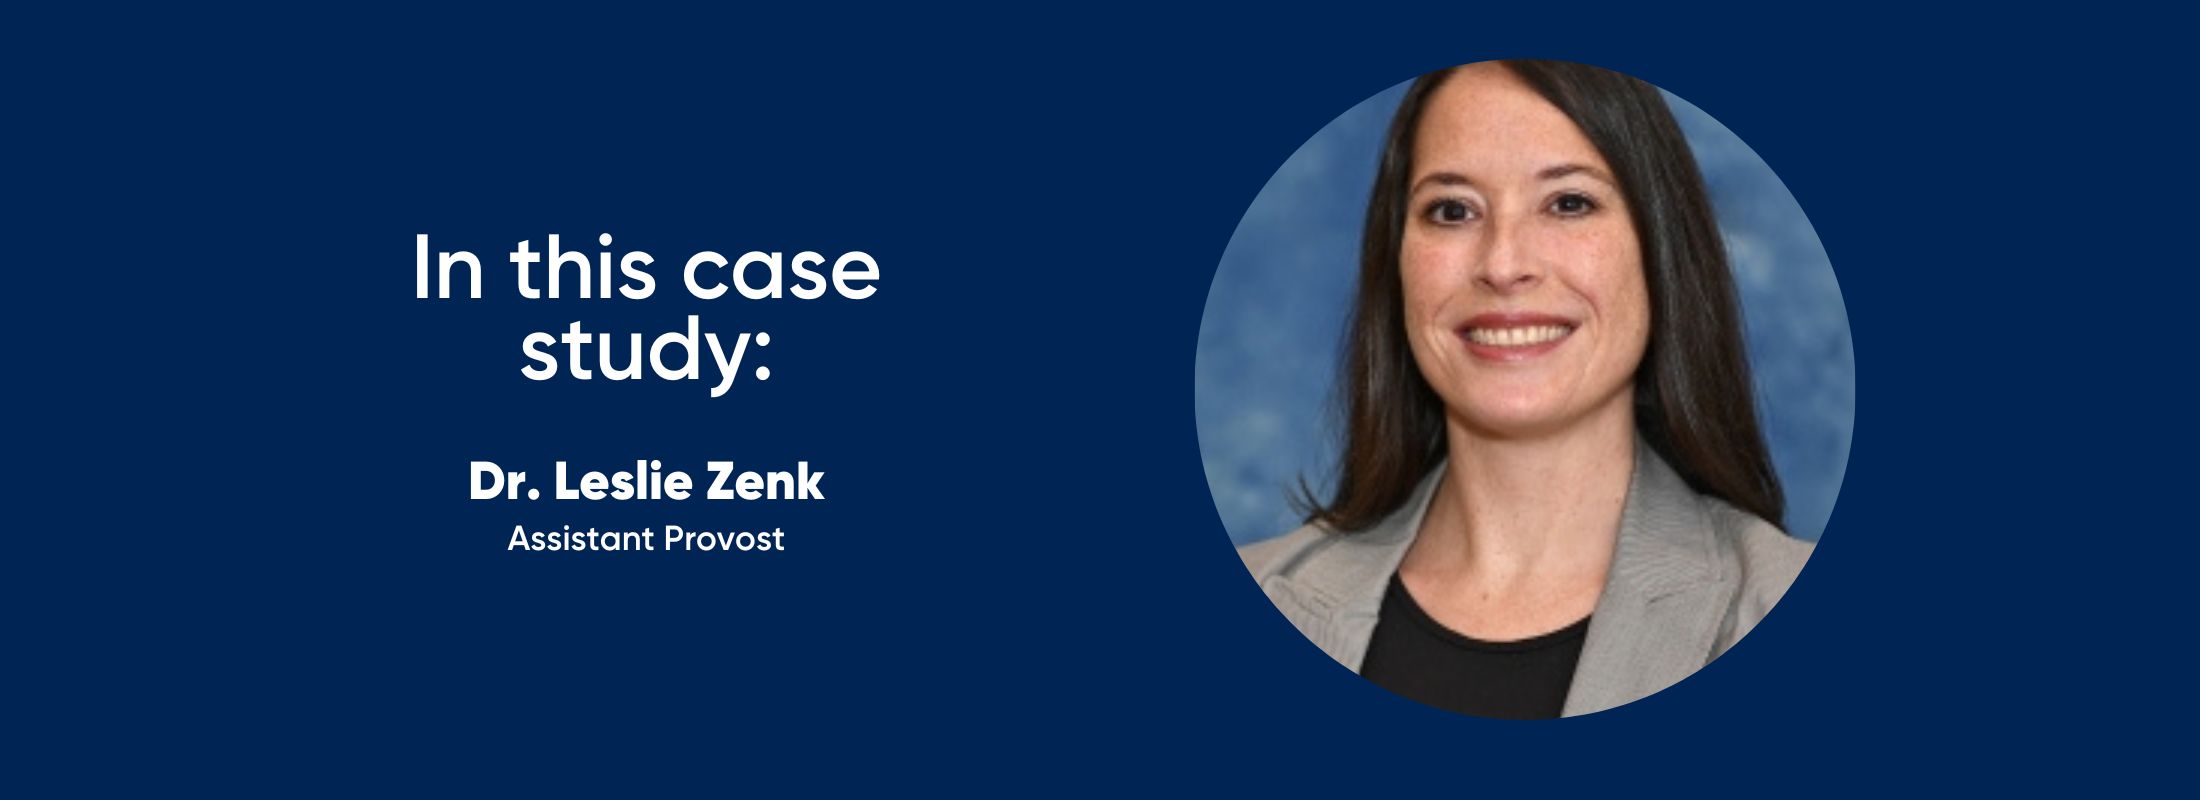 in this case study: Dr. Leslie Zenk, Assistant Provost